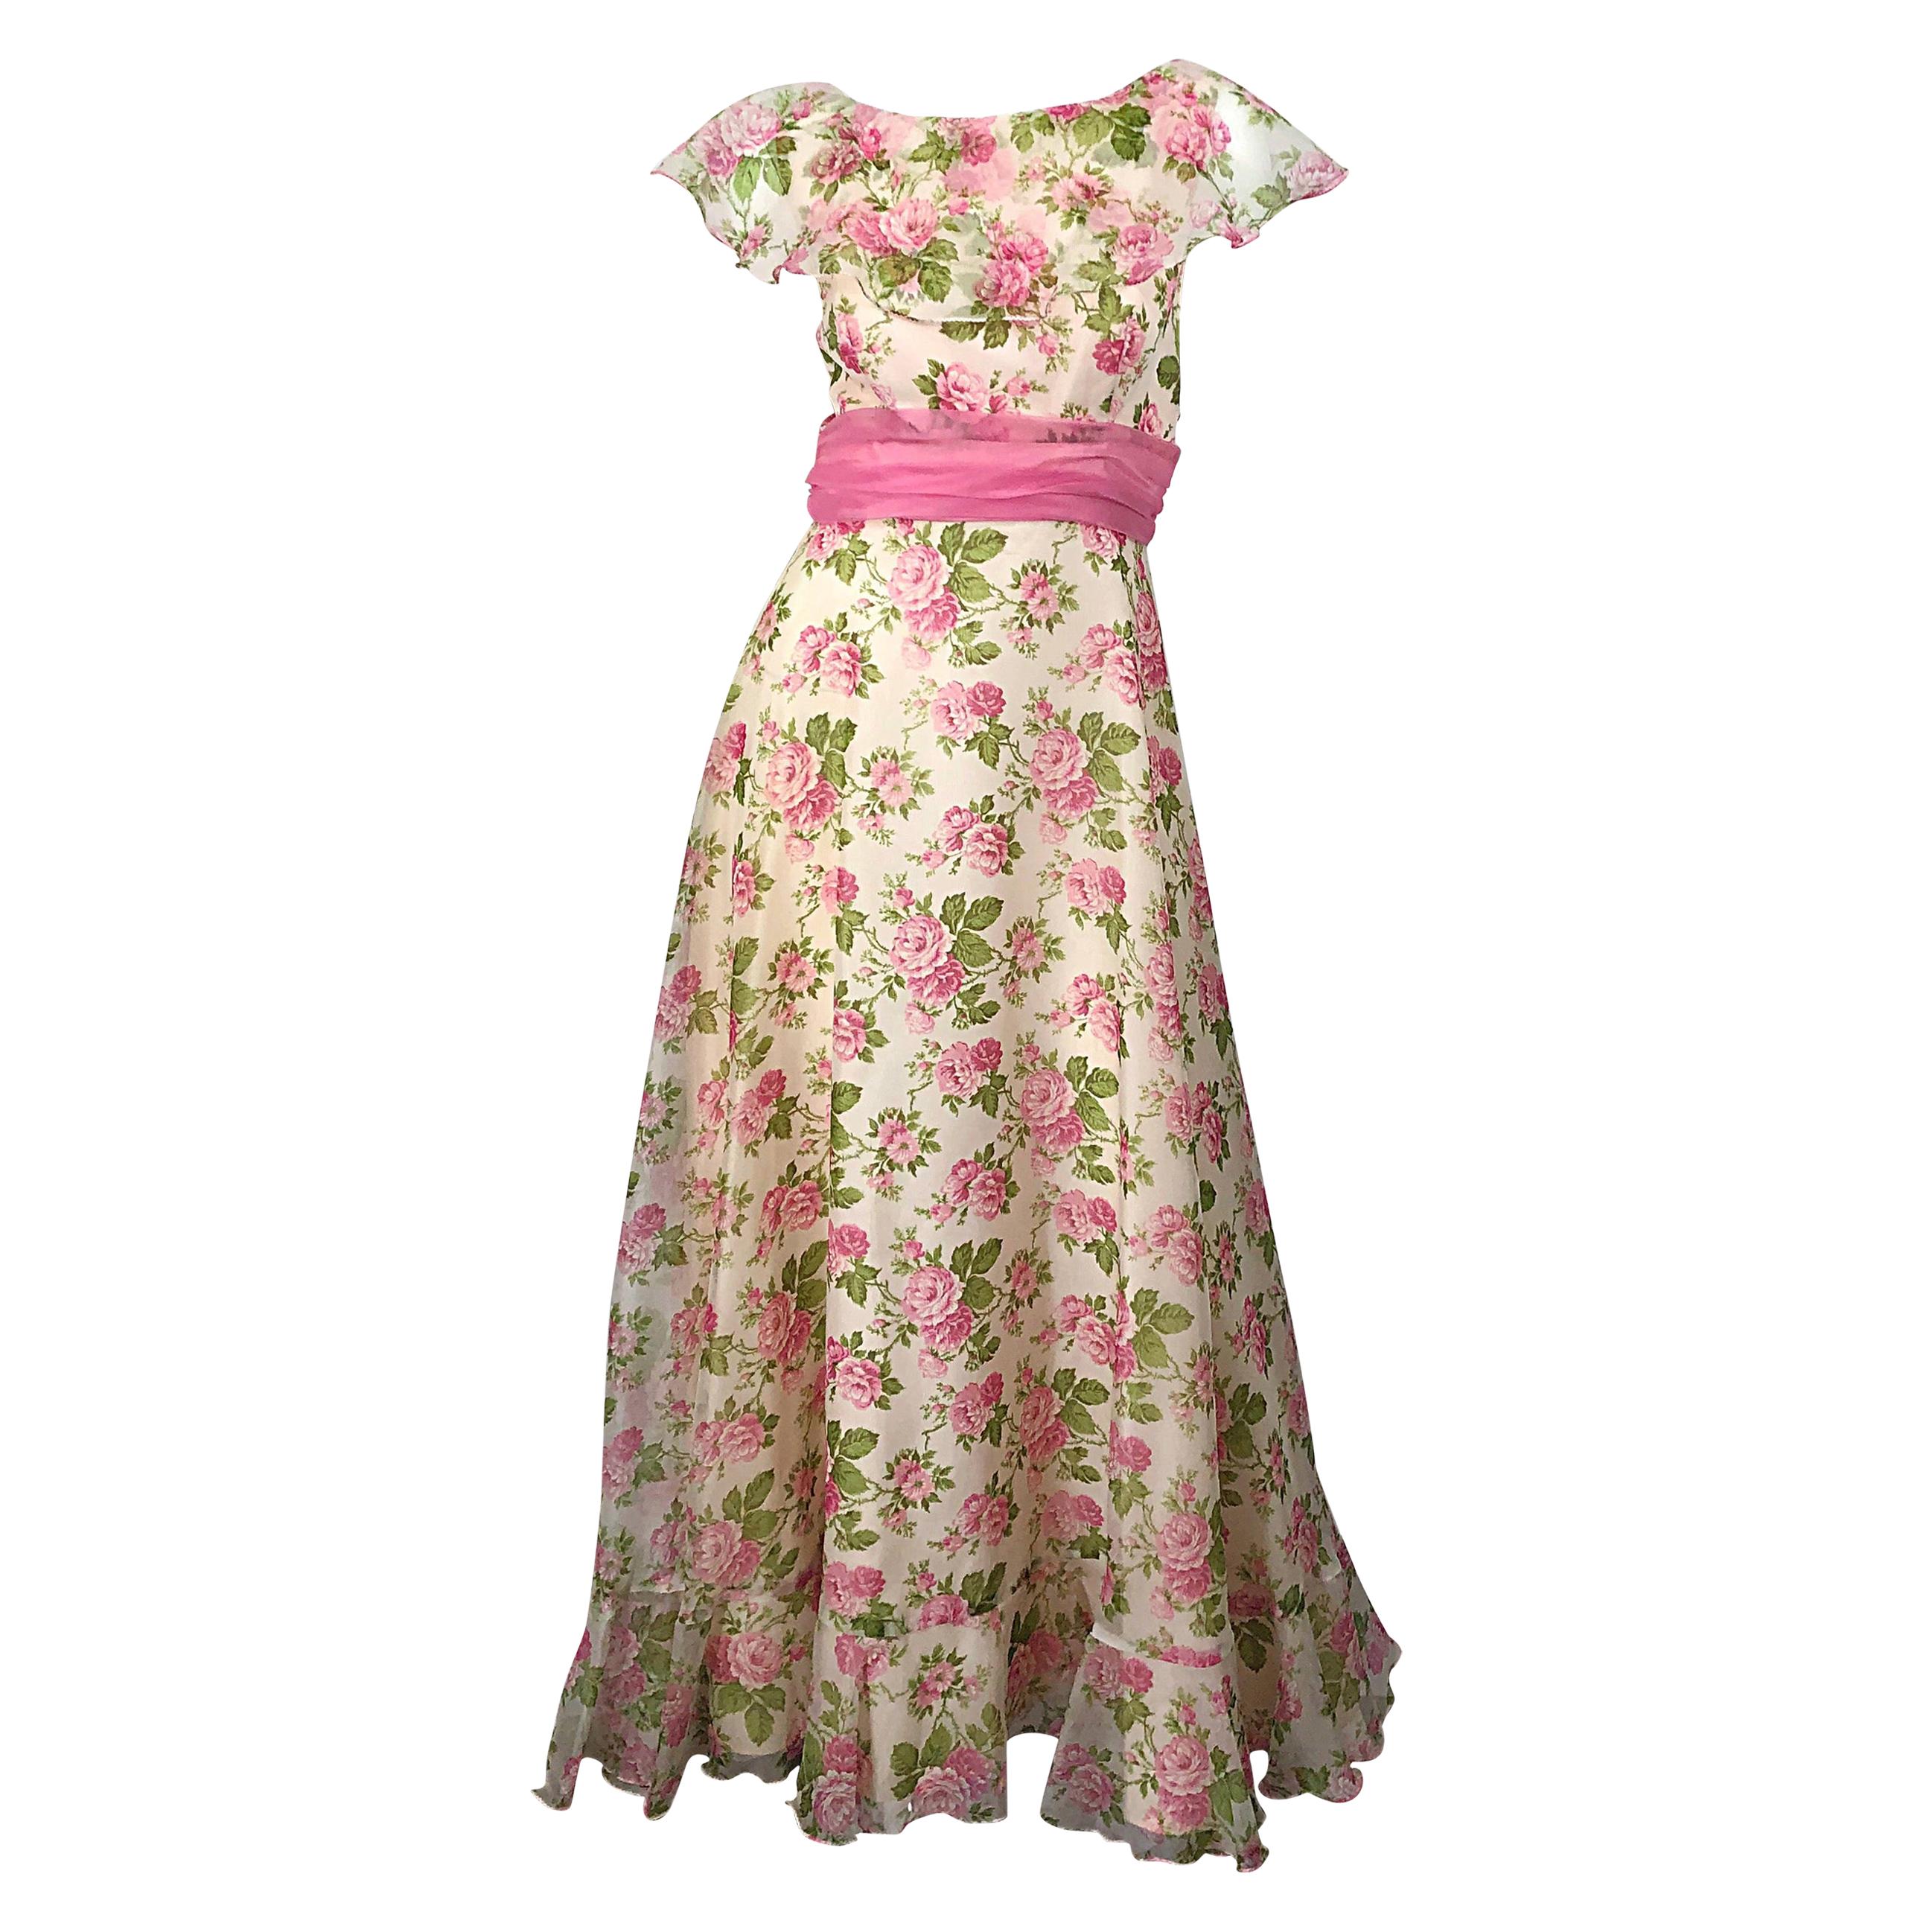 Sylvia Ann 1970s Rose Print Pink Ivory Chiffon Vintage 70s Maxi Dress Gown For Sale